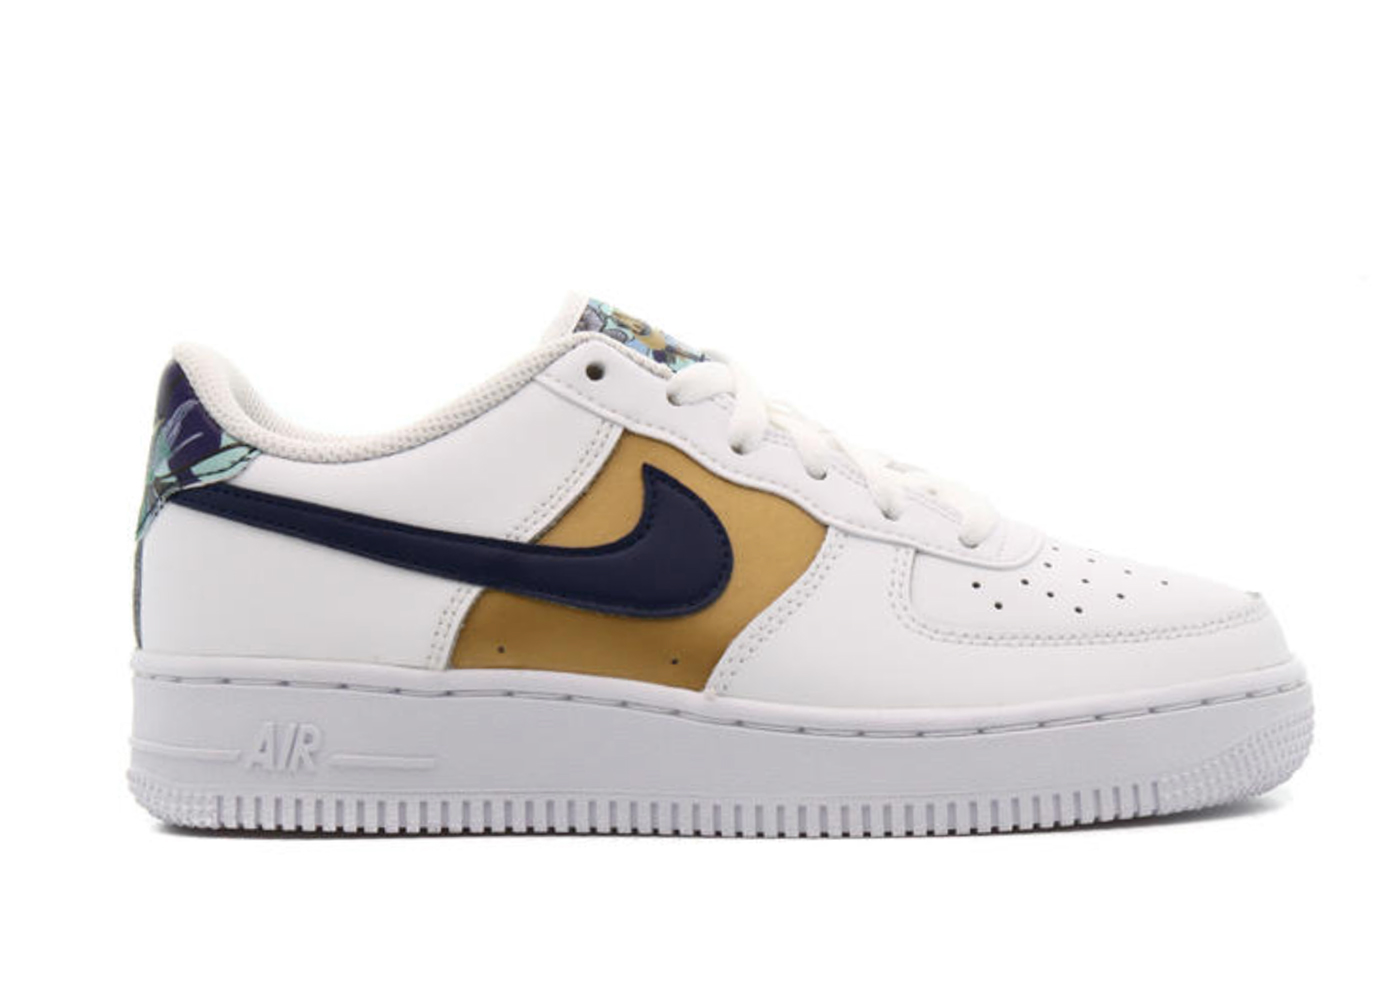 nike air force blue and gold